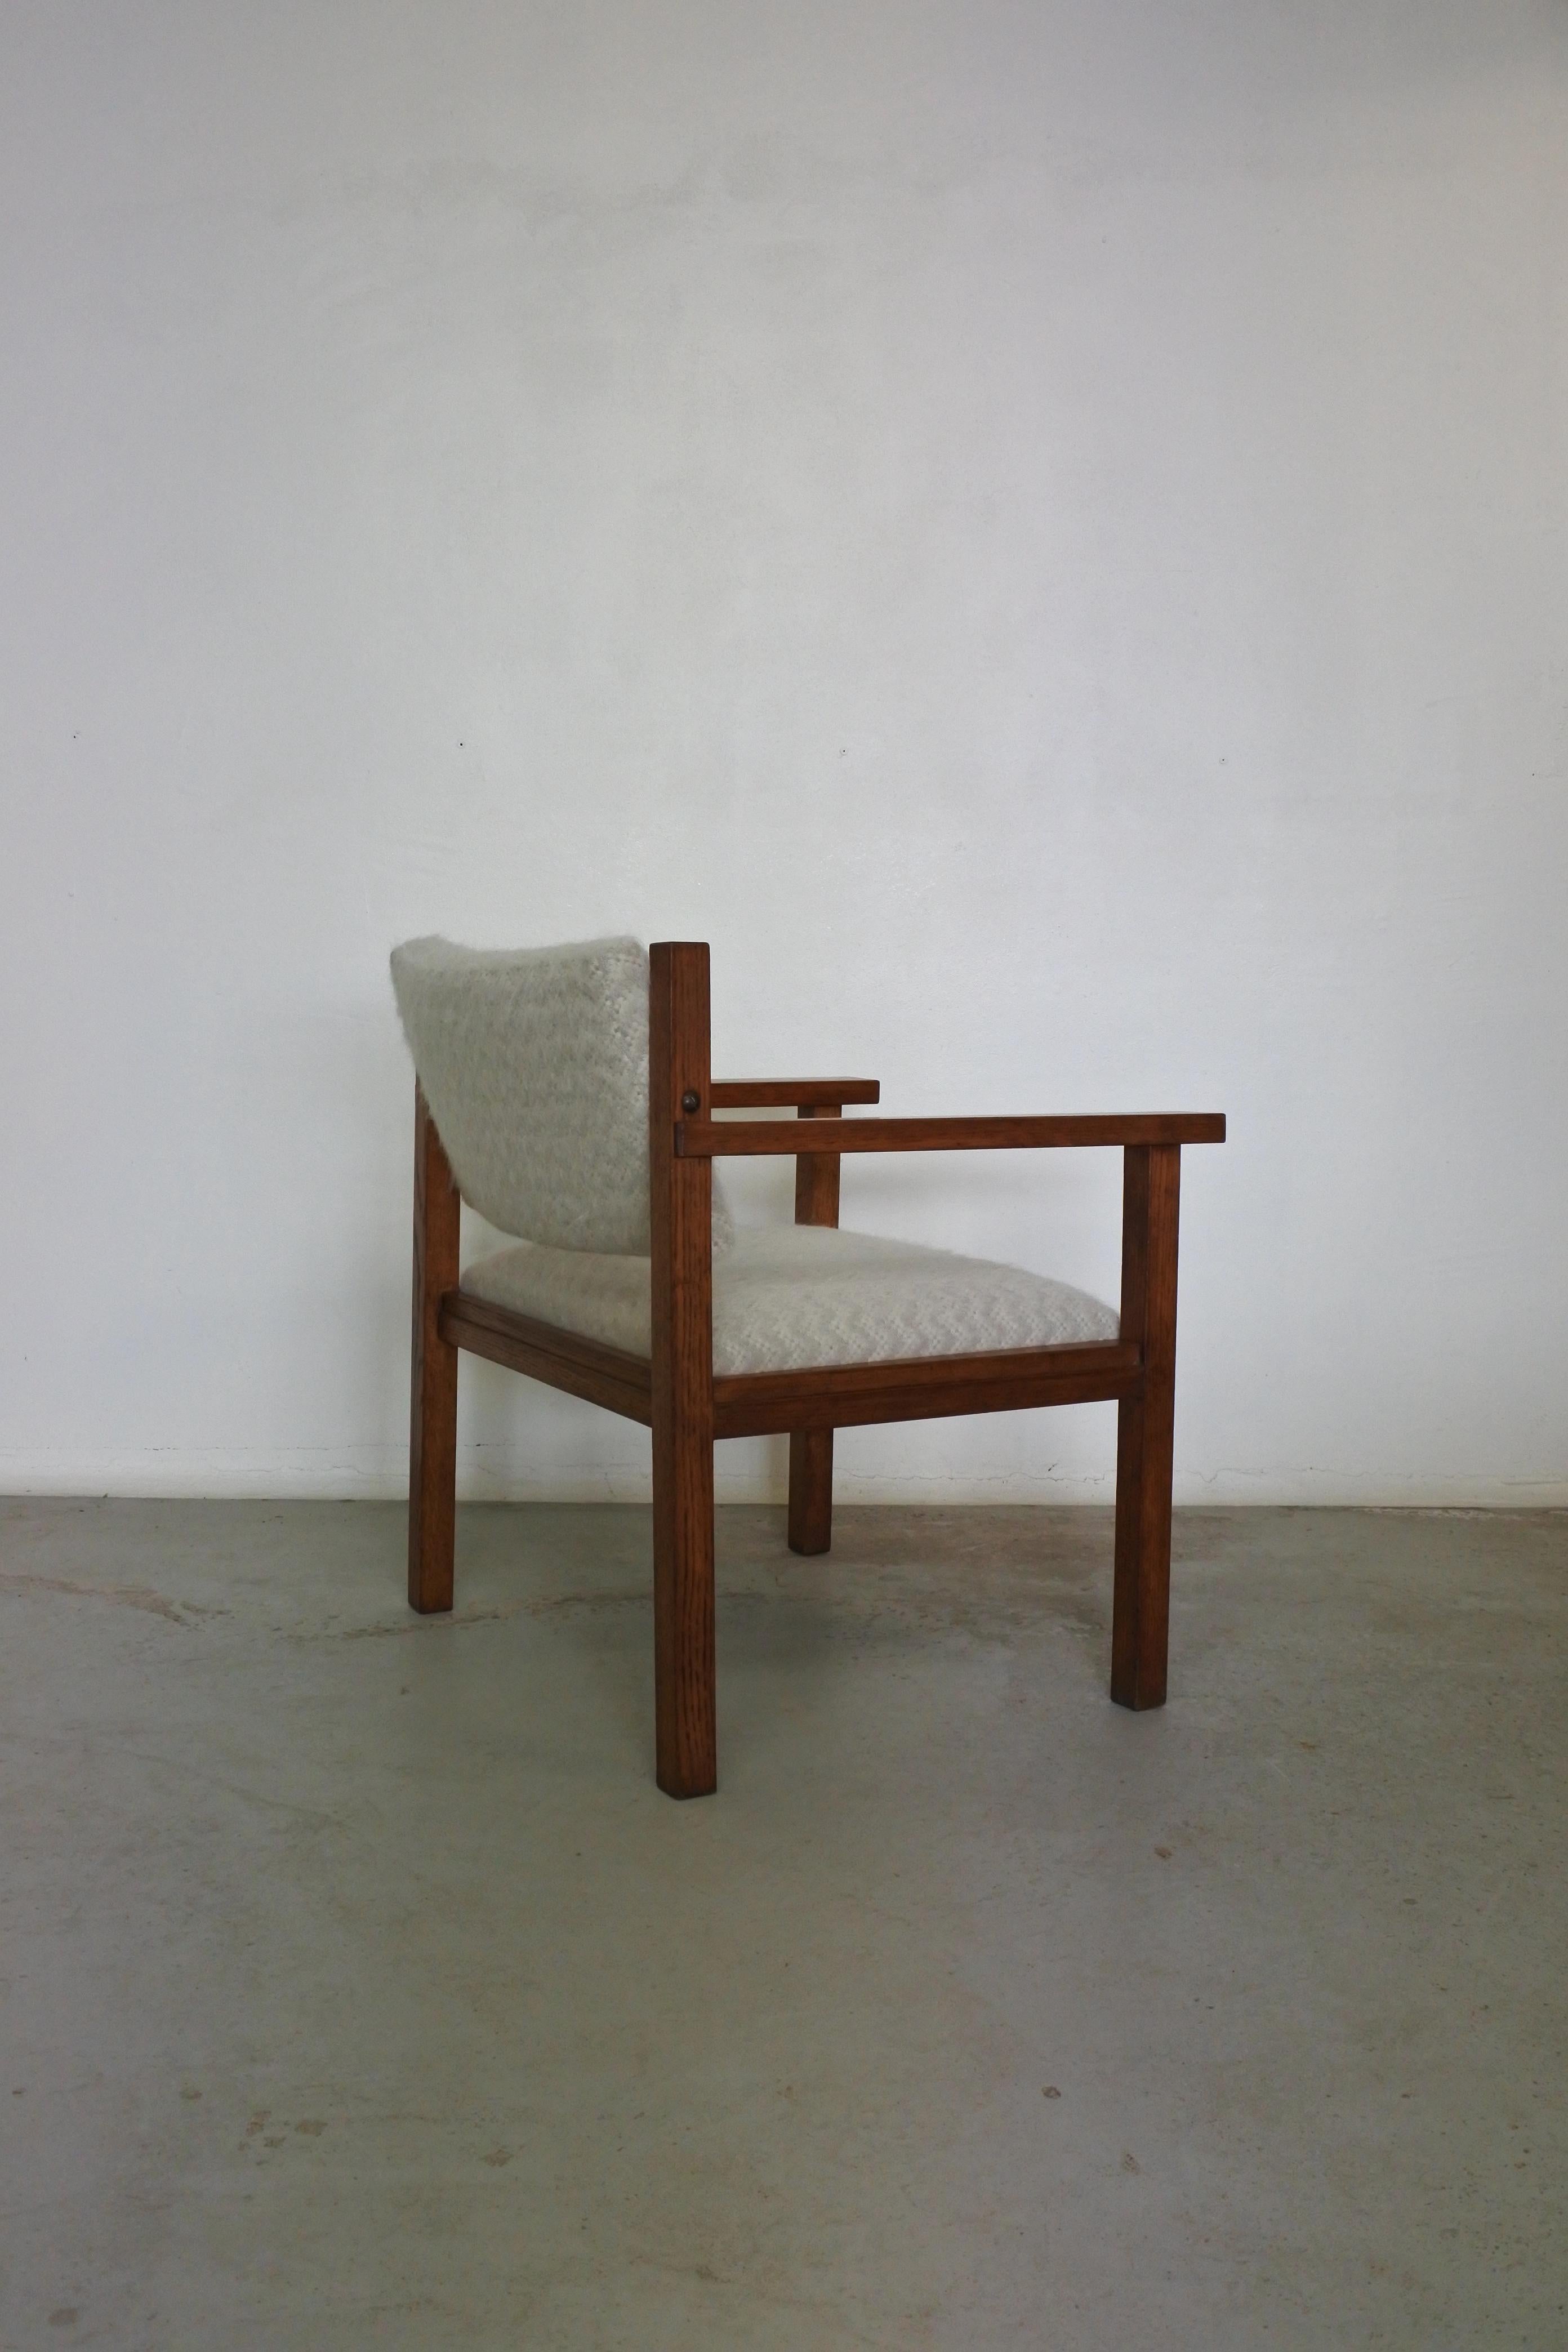 Mid-20th Century Modernist Armchair in Oak Wood, France, 1940s For Sale